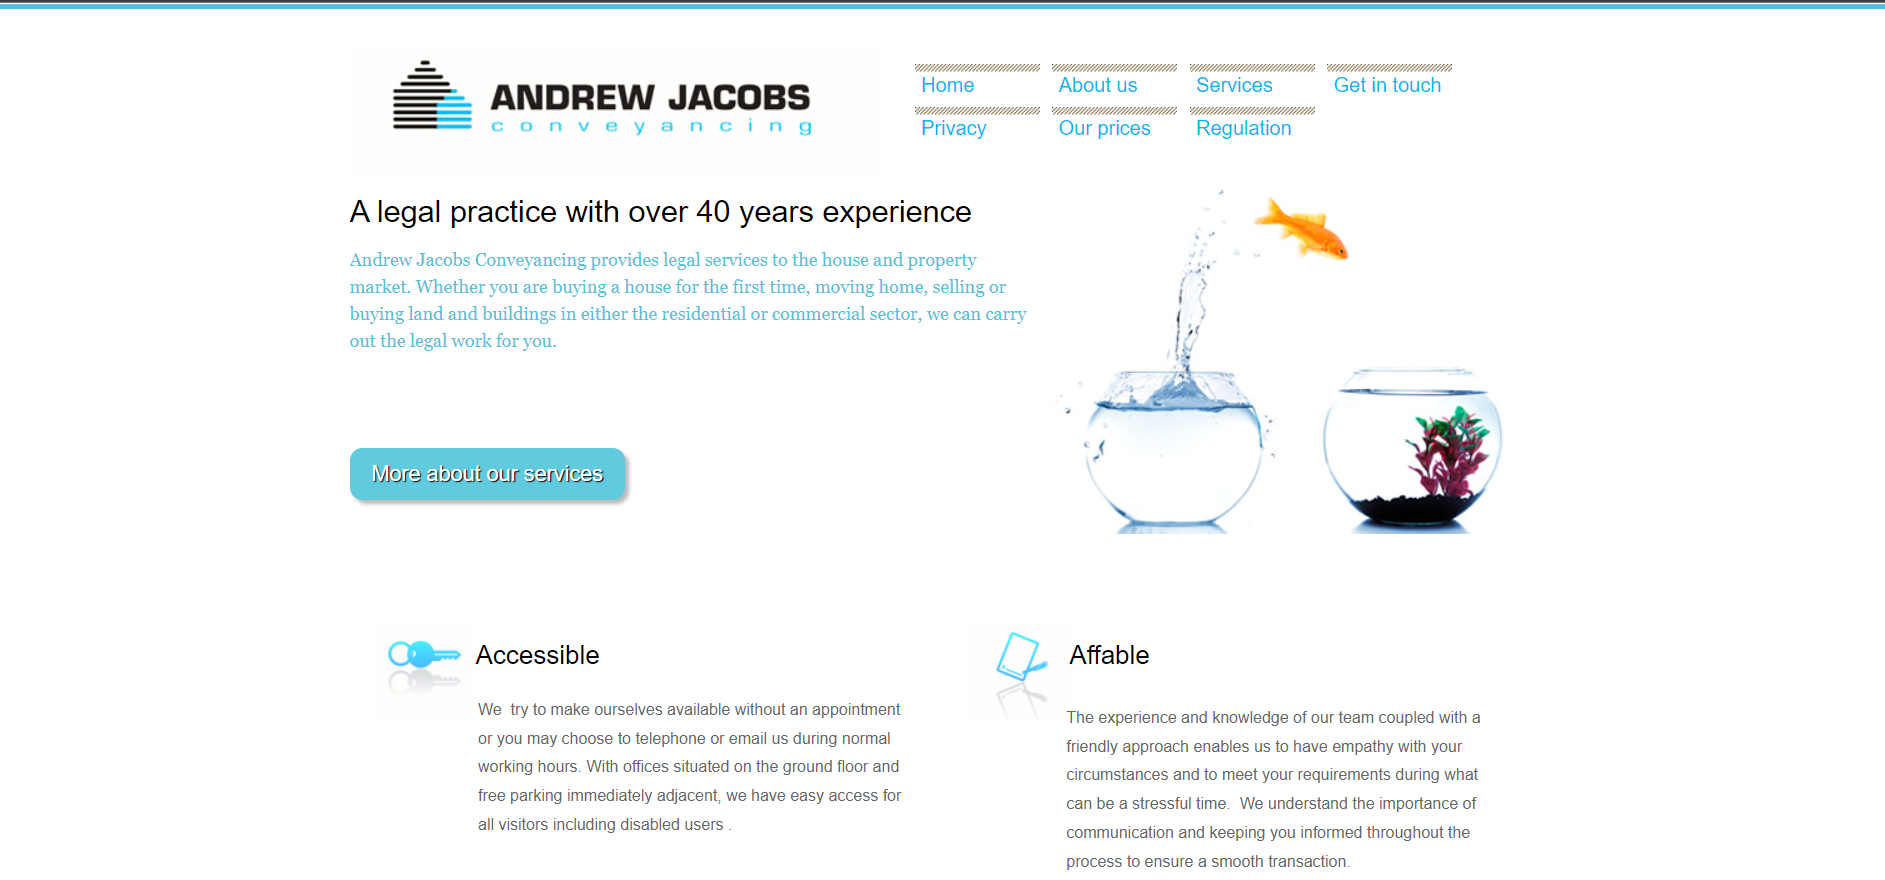 Andrew Jacobs Conveyancing Limited